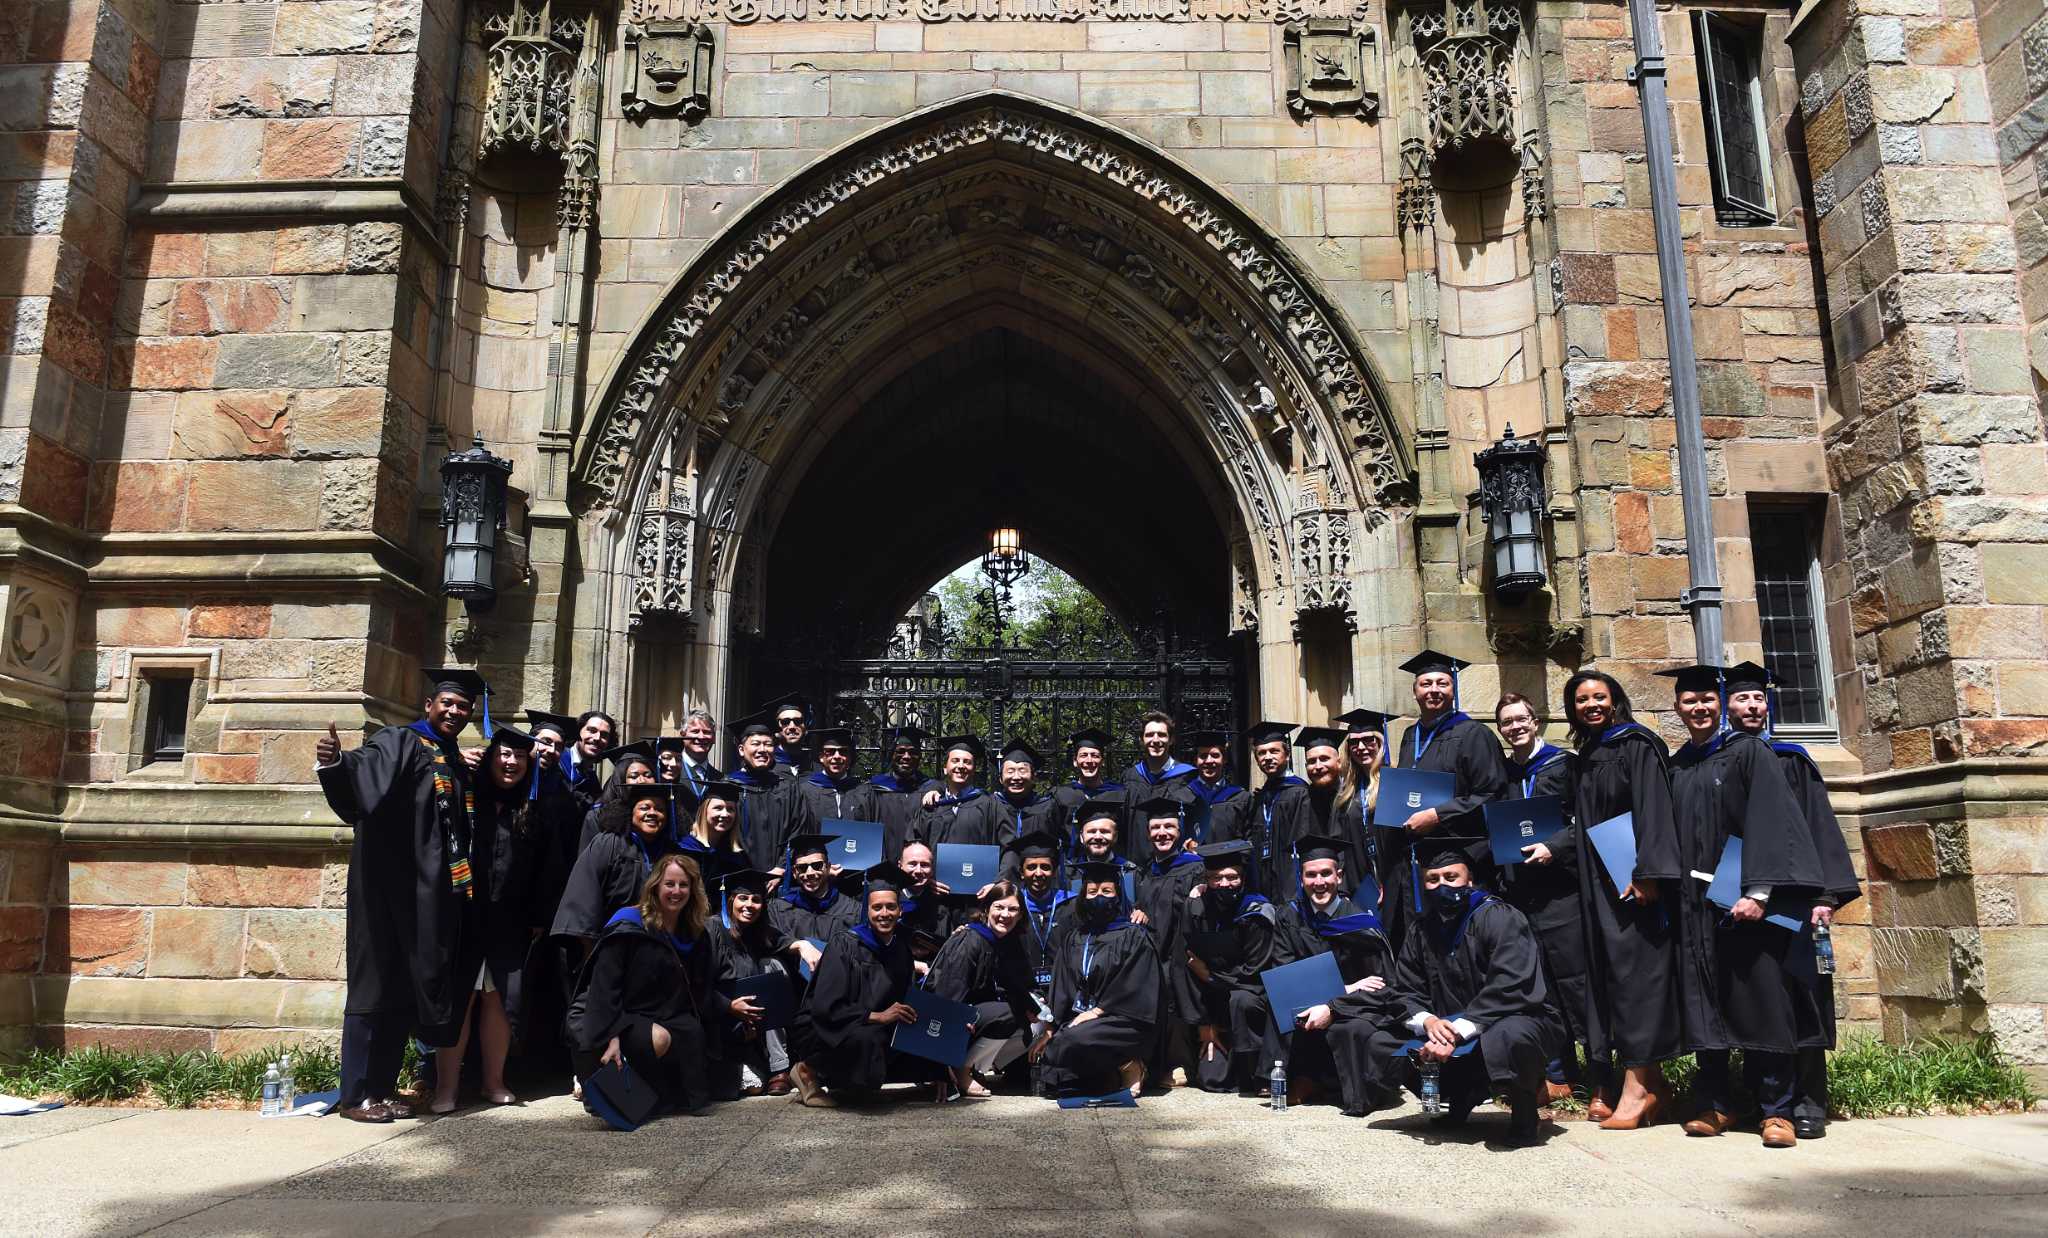 Yale graduation weekend returns, complete with families, friends and a